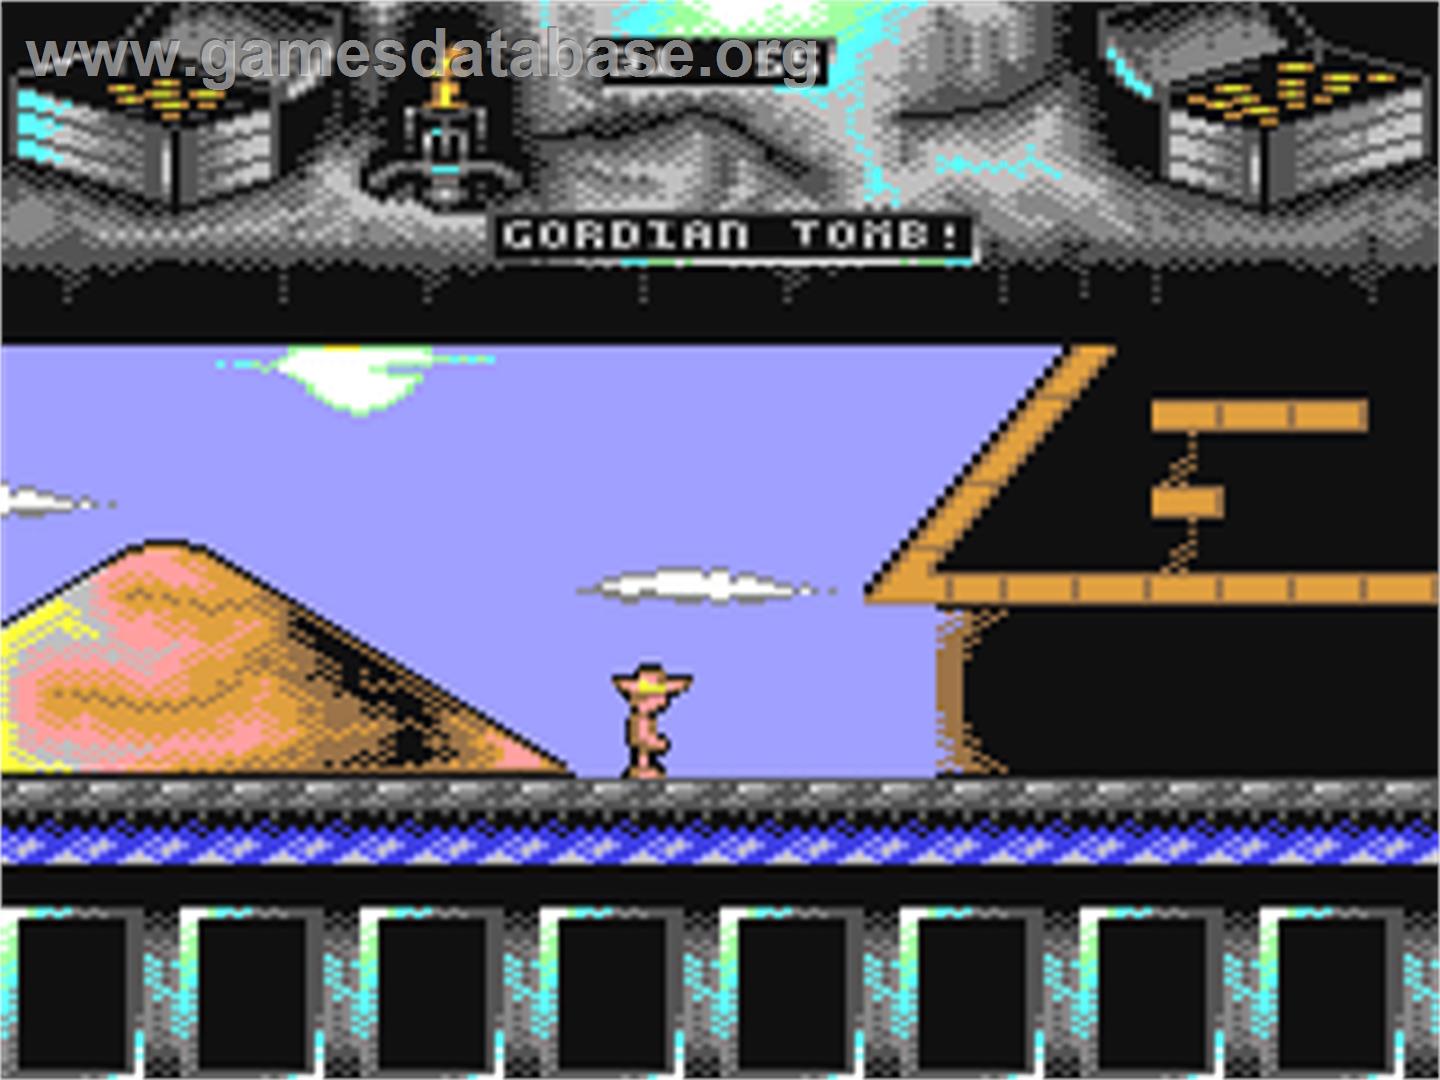 Gordian Tomb - Commodore 64 - Artwork - In Game